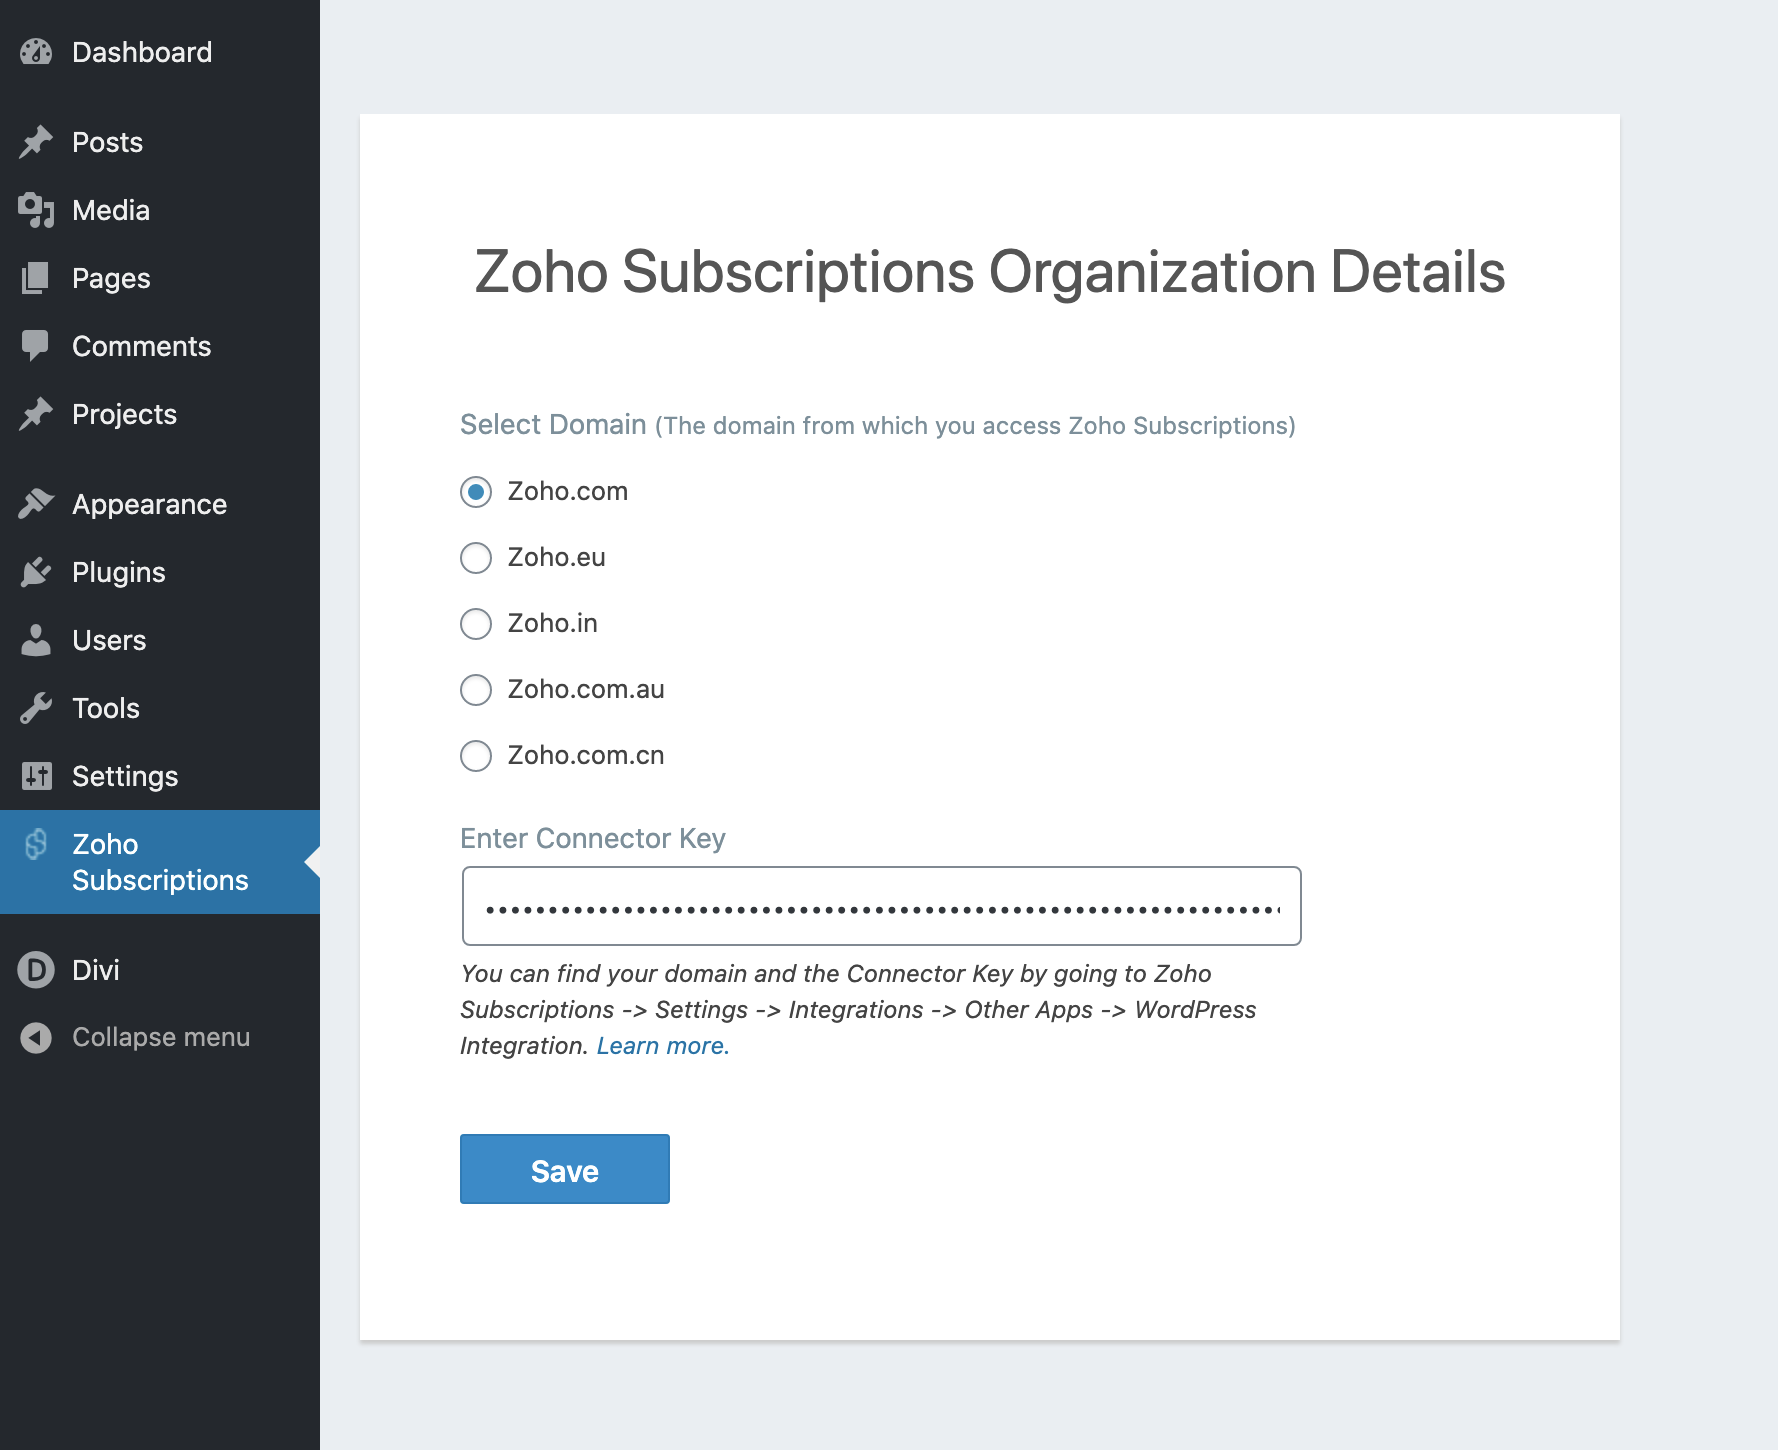 Zoho Subscriptions account details page with connected organization